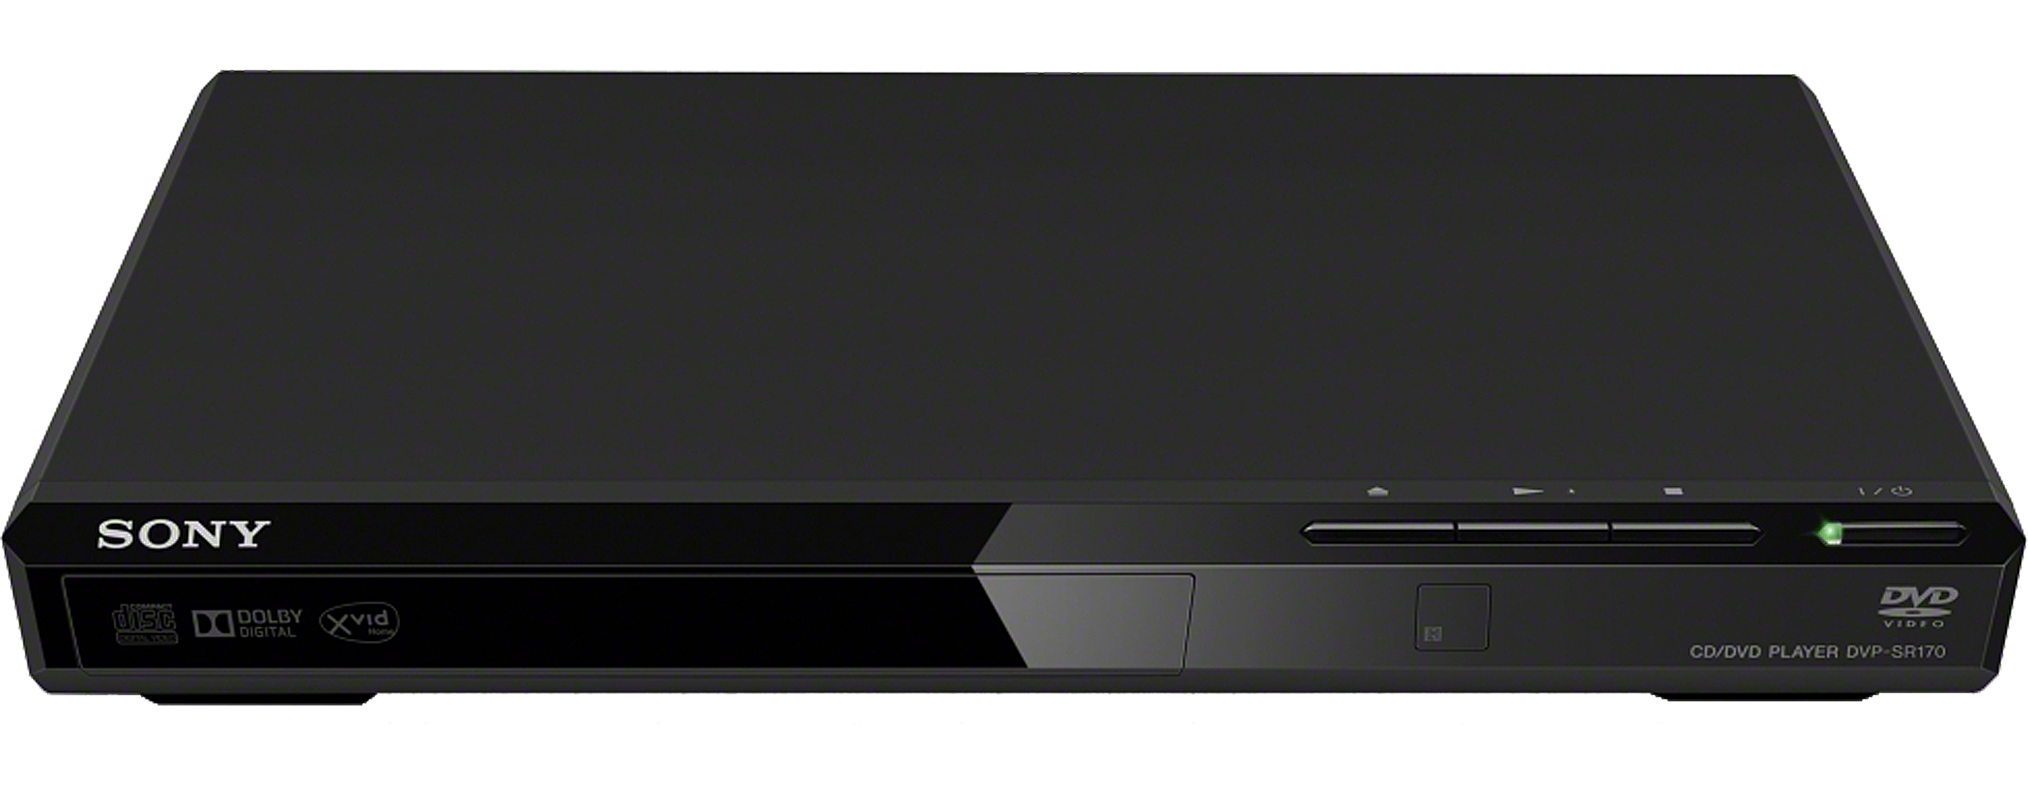 DVD Players Download PNG Image